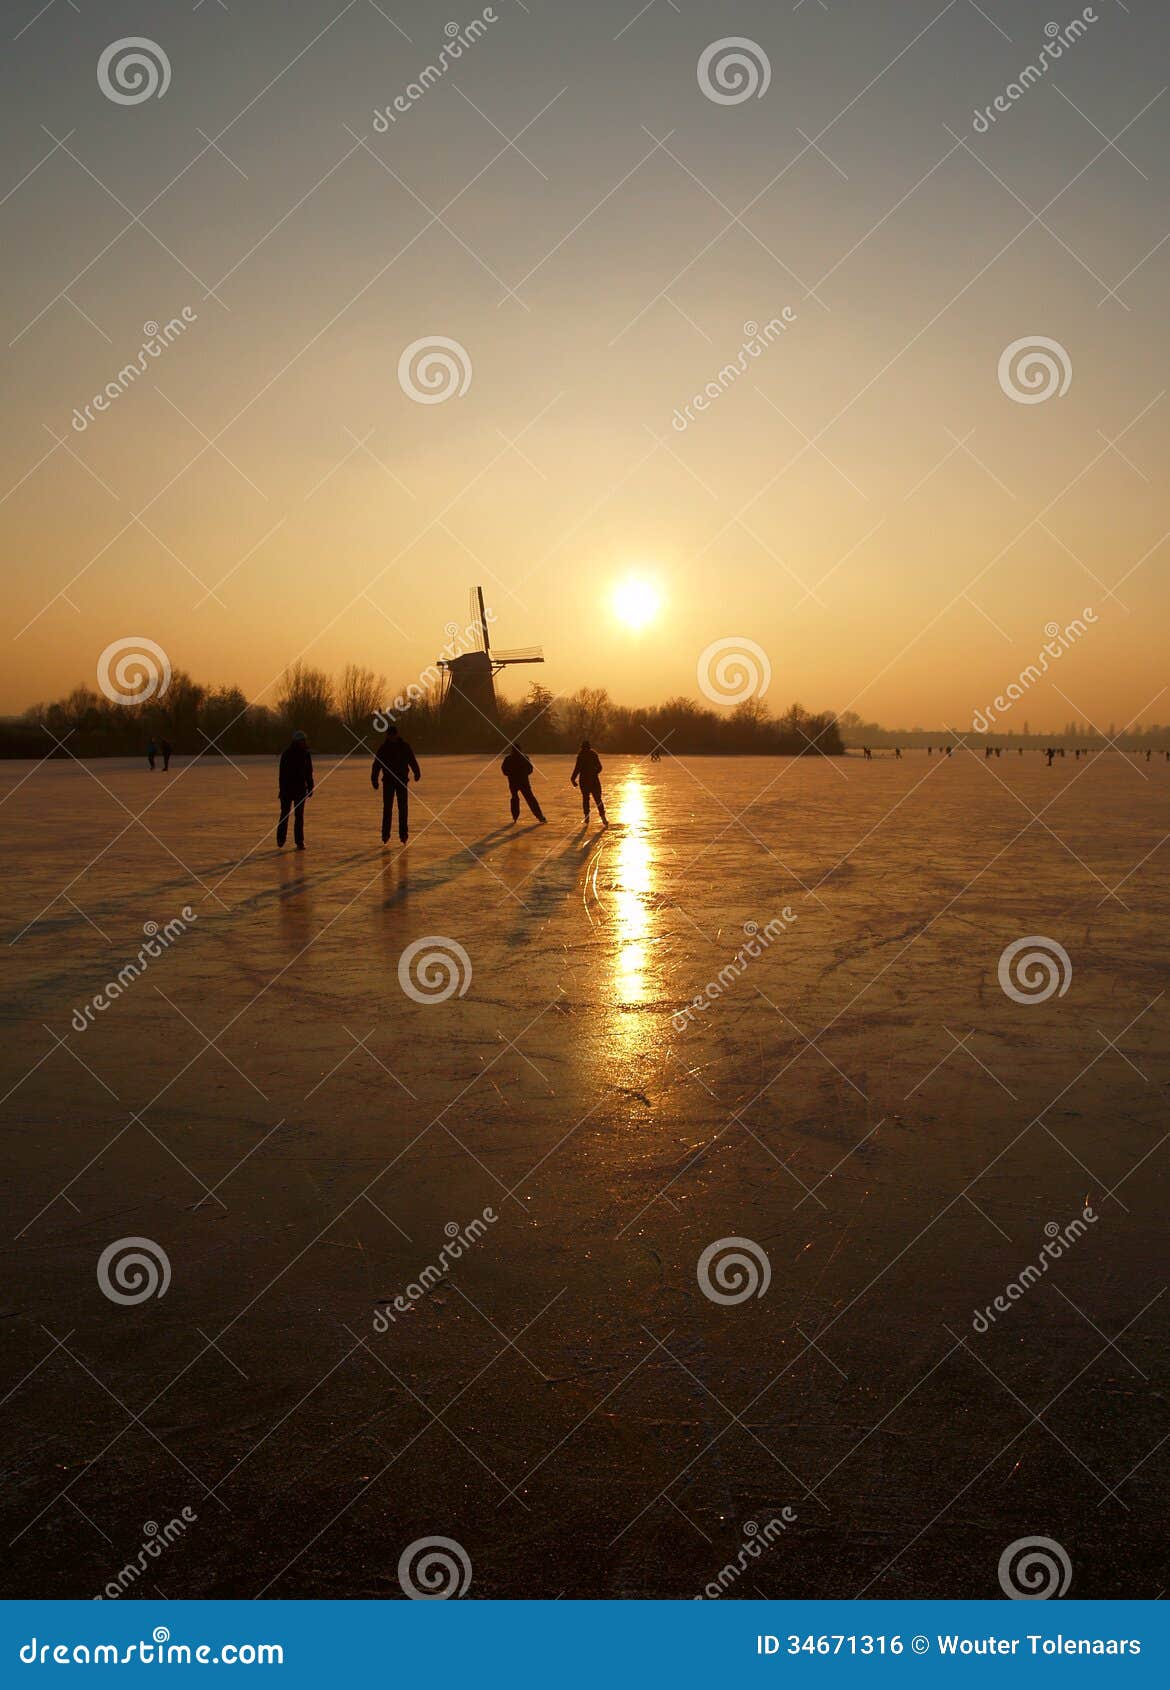 ice skaters on a frozen lake in rotterdam the netherlands